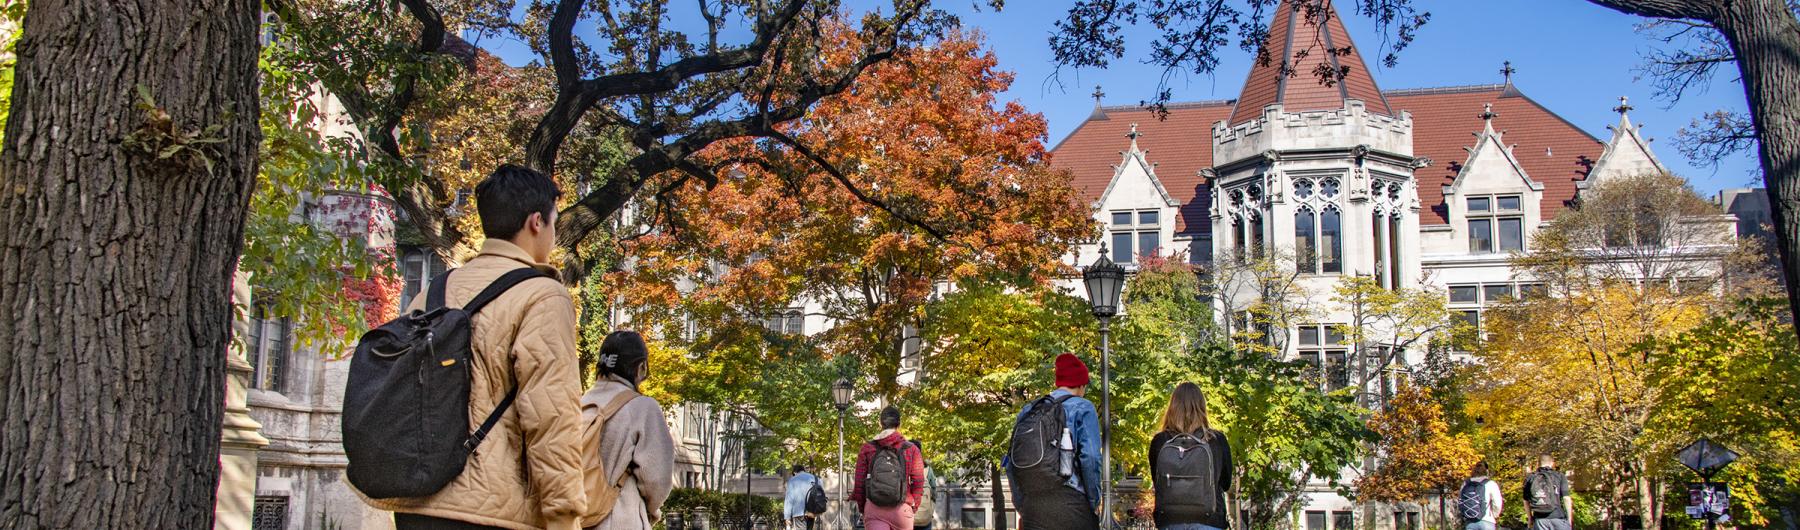 UChicago campus in Fall with students walking